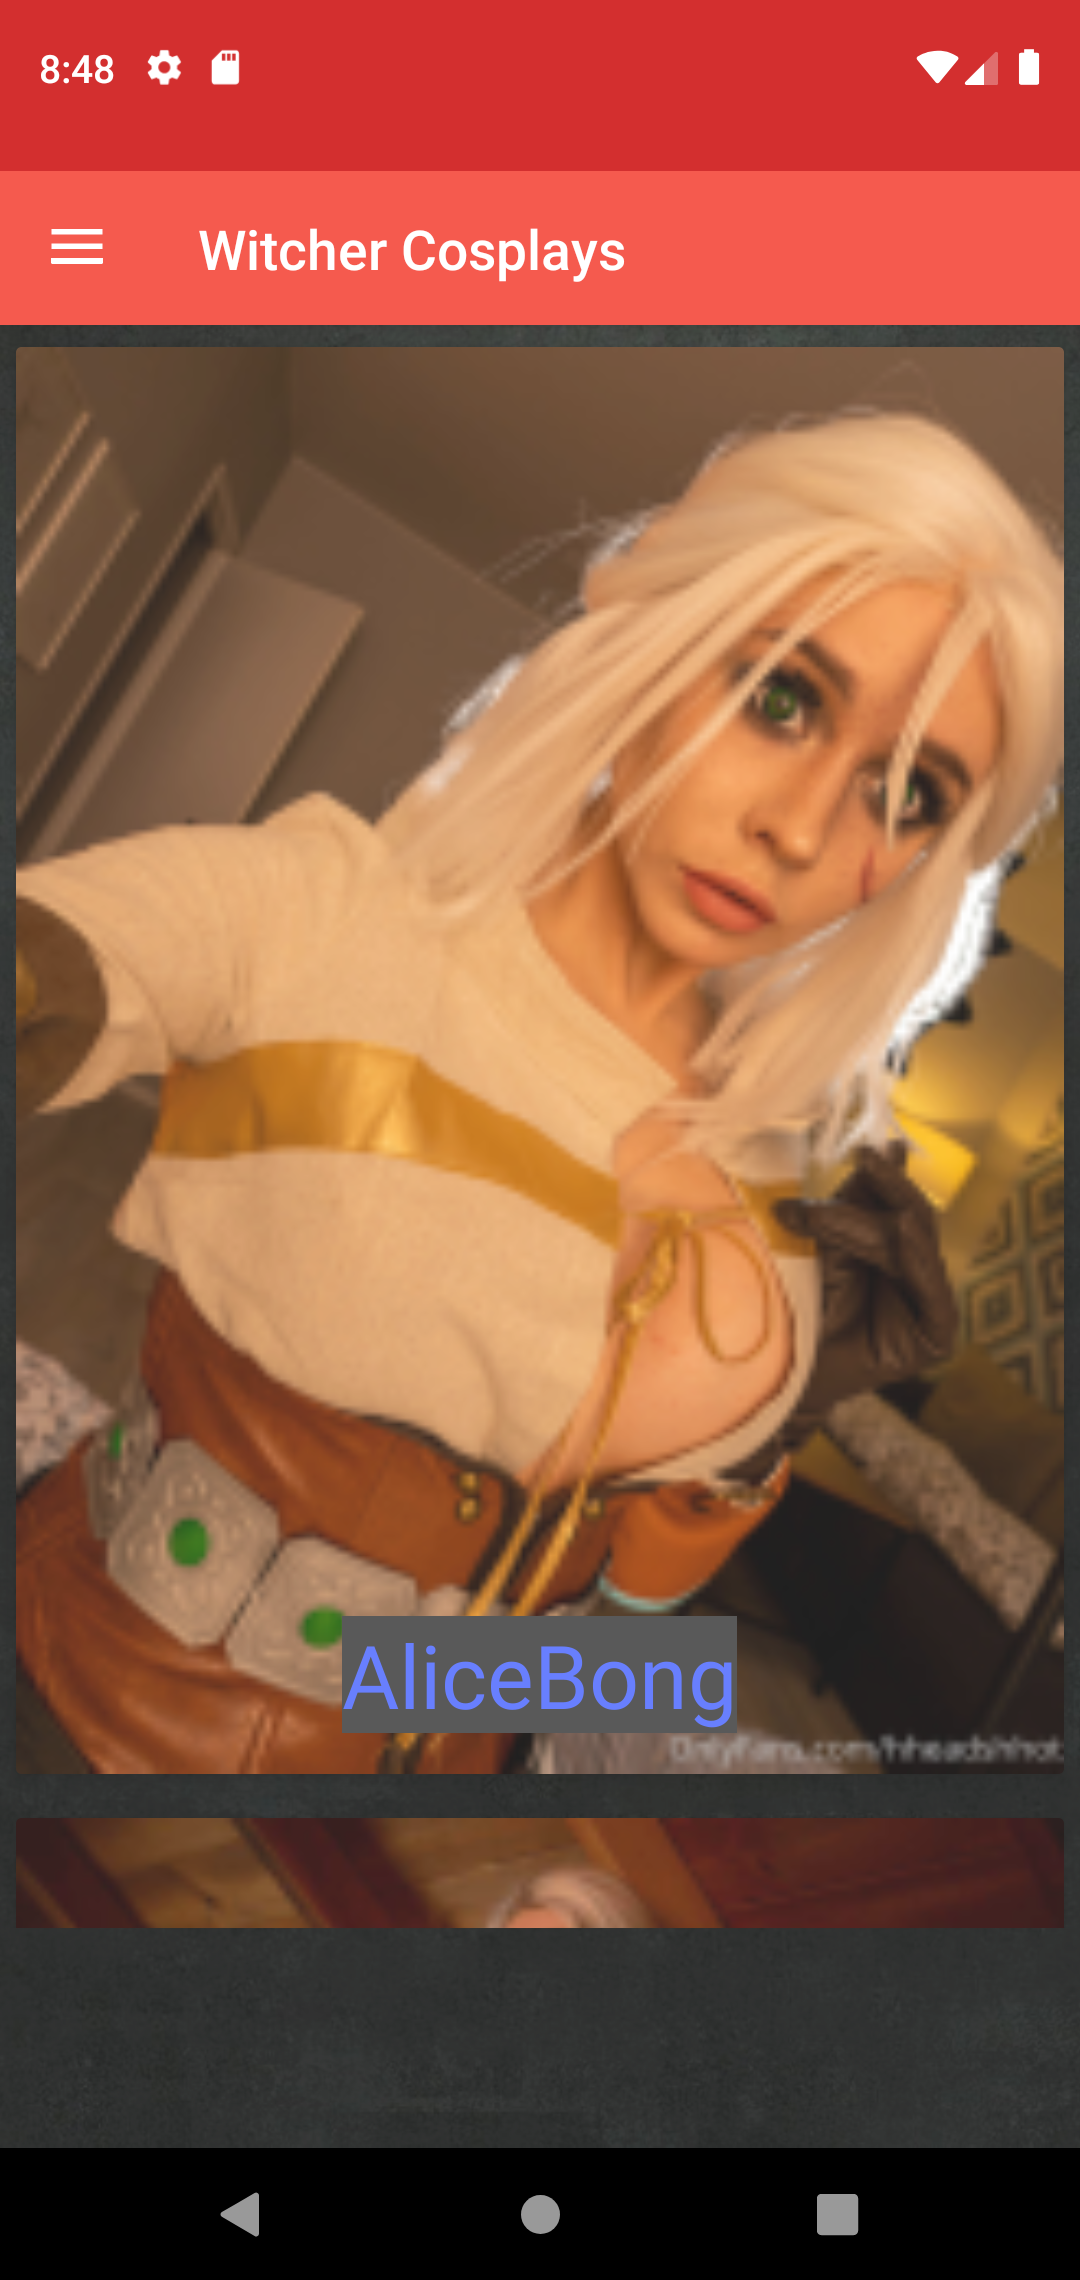 Witcher Cosplays apk,app,hentei,witcher,aplikasi,sissy,for,hentai,cosplay,anime,galleries,adult,apps,gallery,android,sexy,pics,best,pictures,erotic,hot,comicses,comics